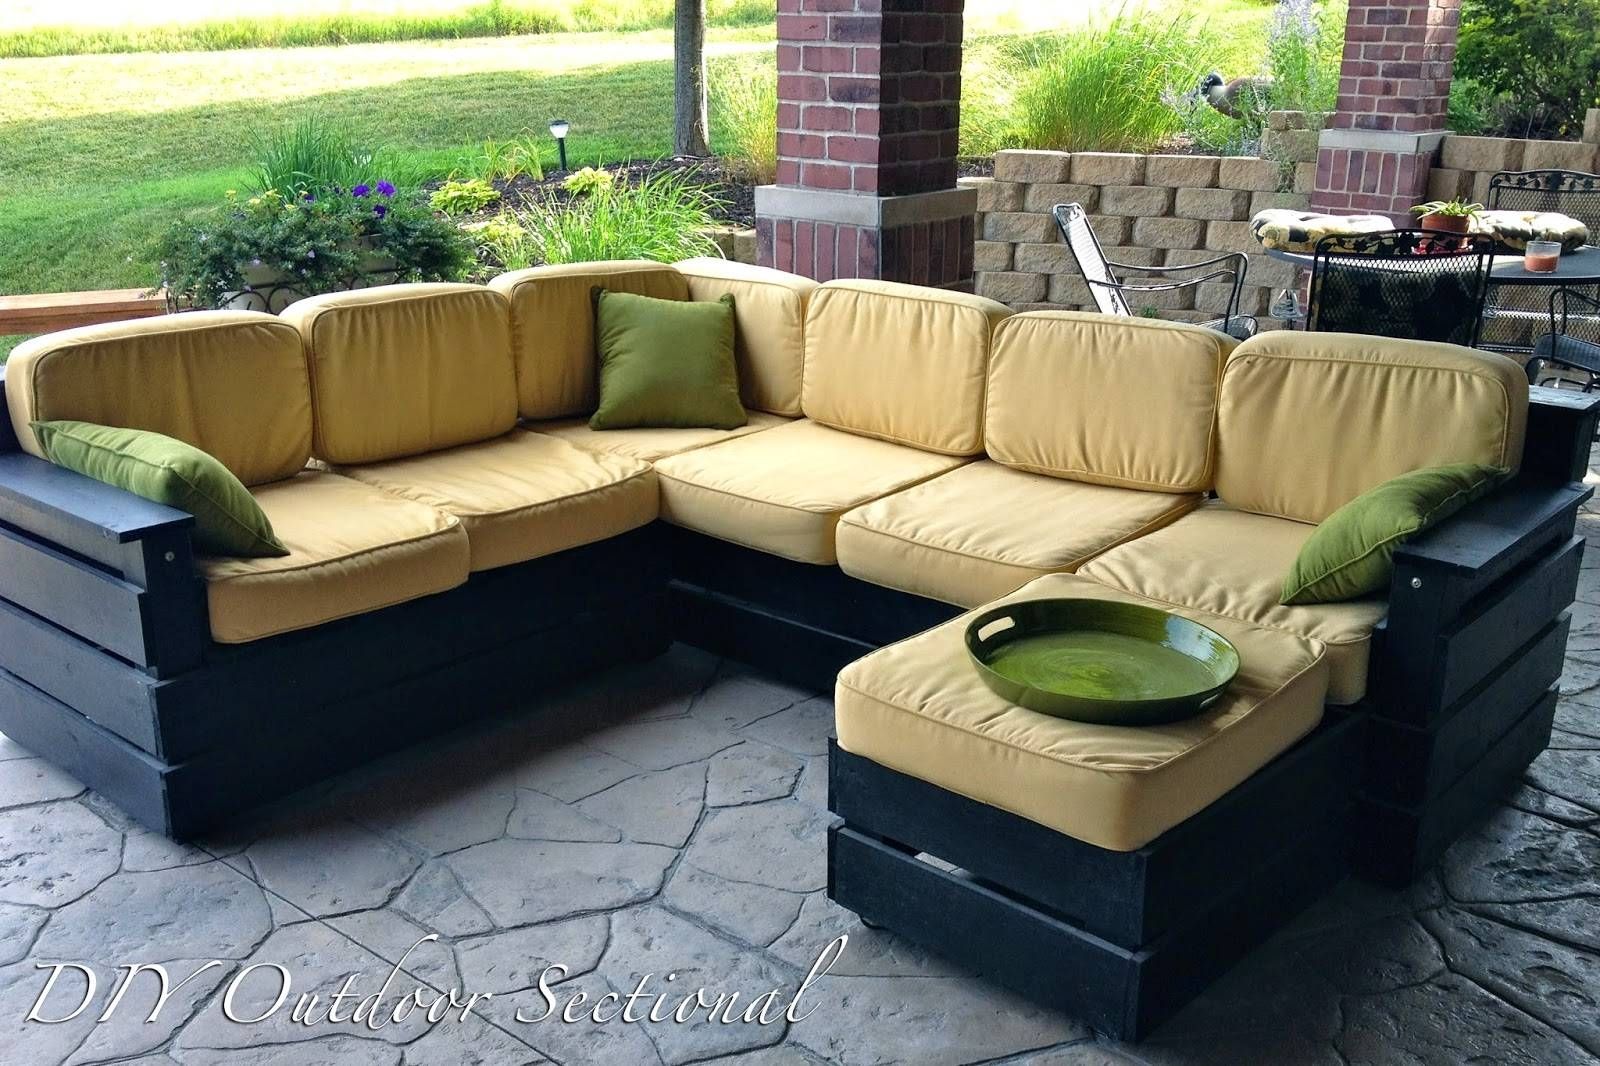 Patio, Diy Patio Sectional | Pythonet Home Furniture With Cheap Patio Sofas (View 13 of 30)